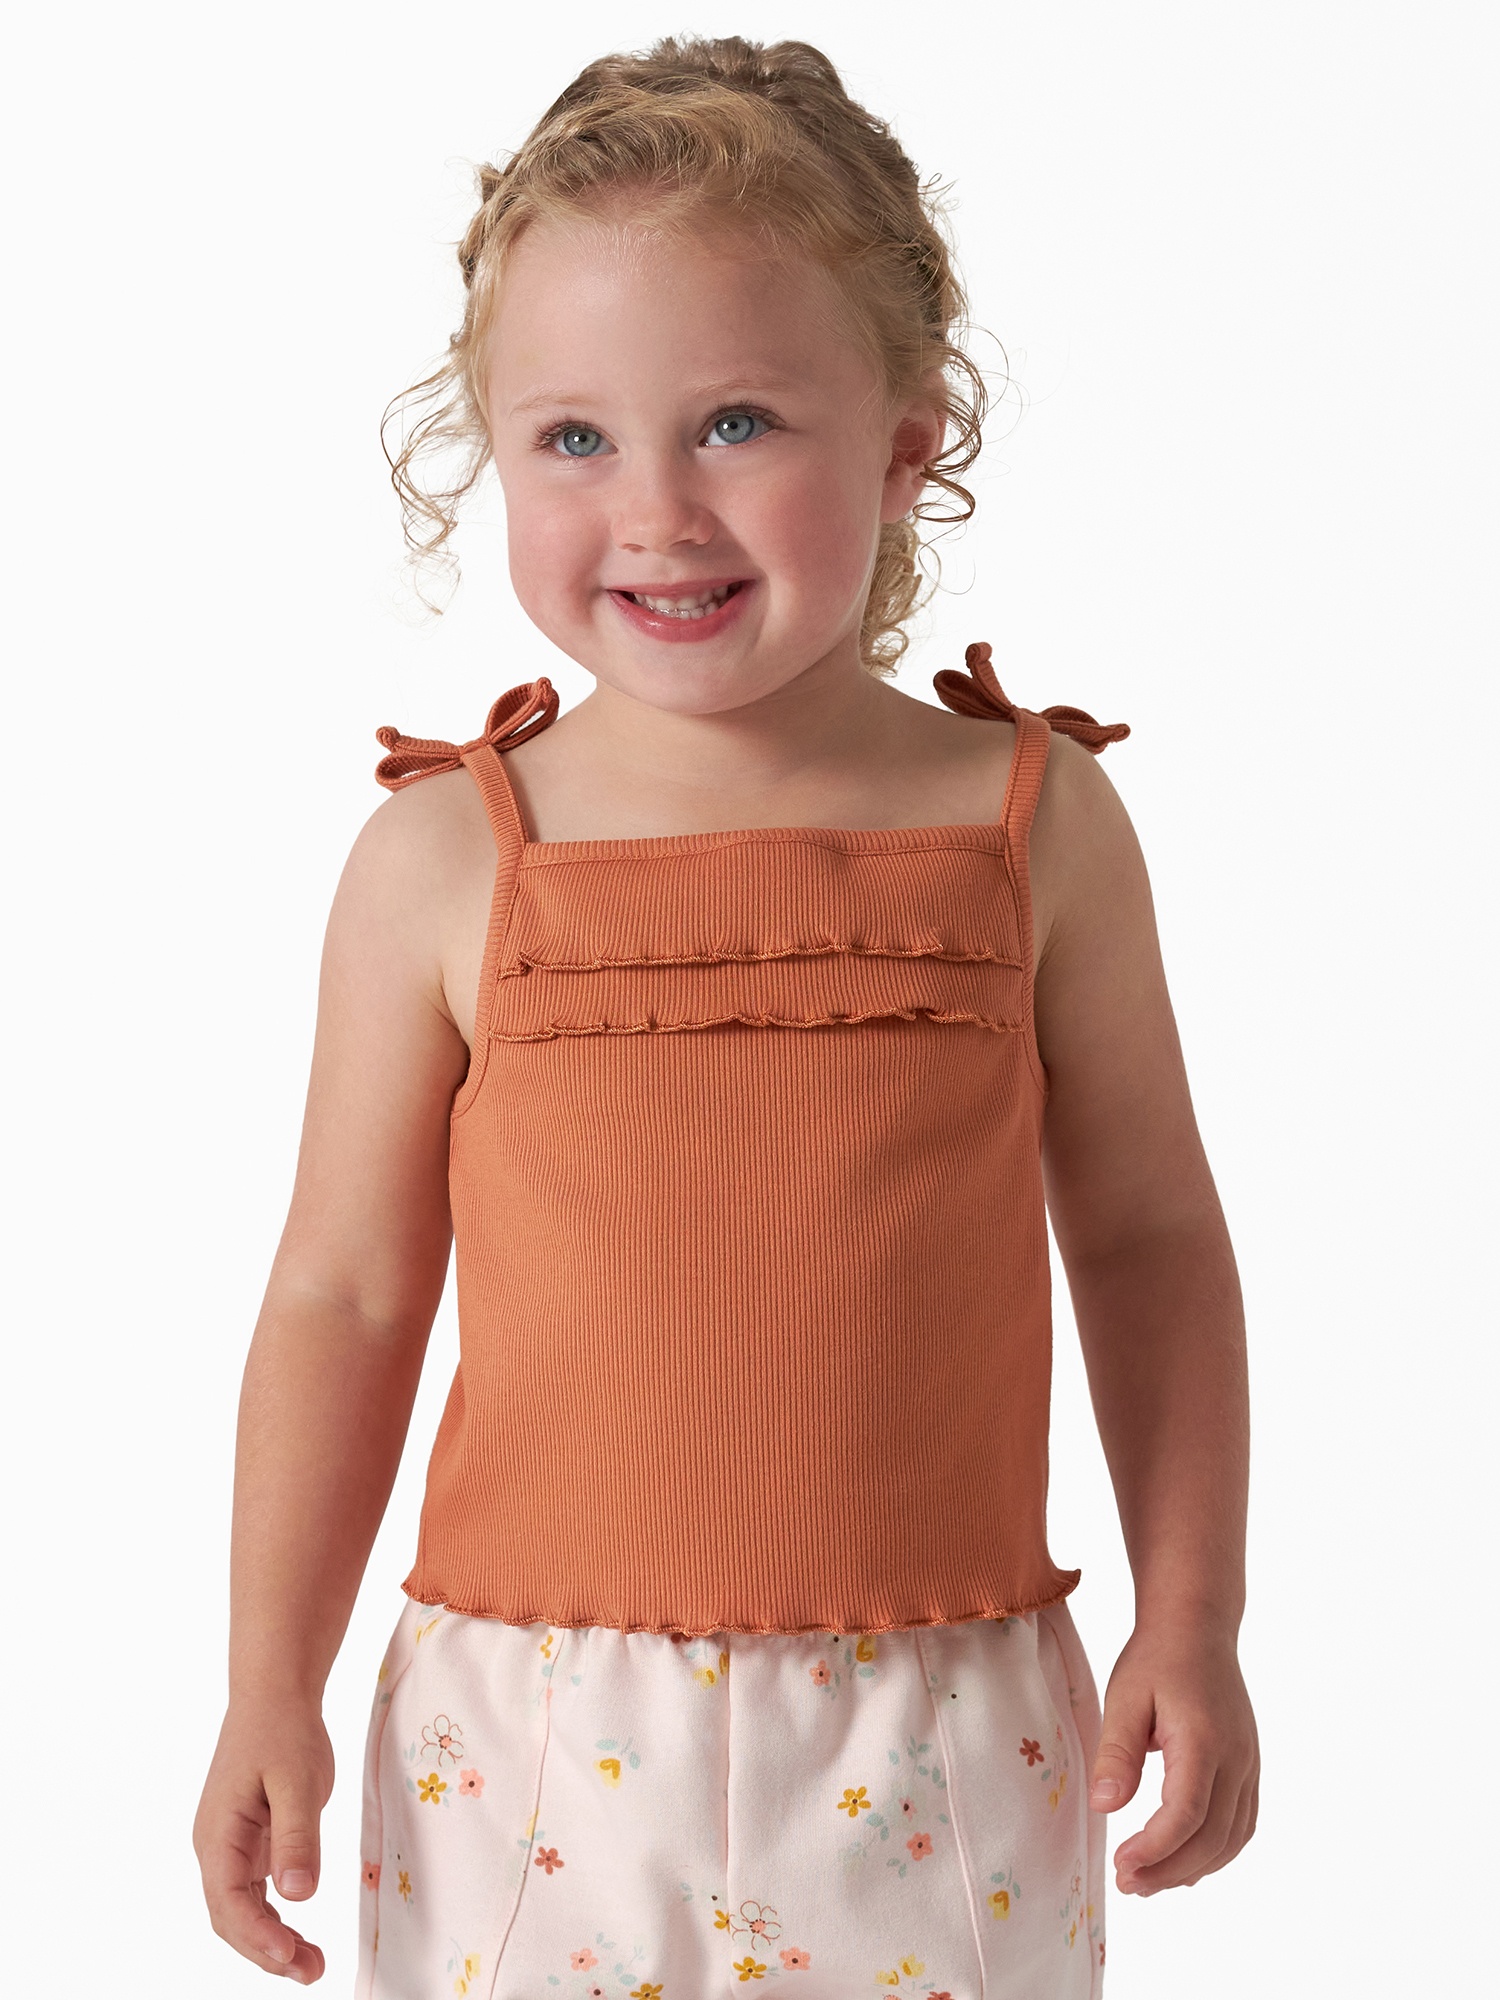 Modern Moments by Gerber Toddler Girl Ruffled Tank Top, 2-Pack, Sizes 12M-5T - image 3 of 14